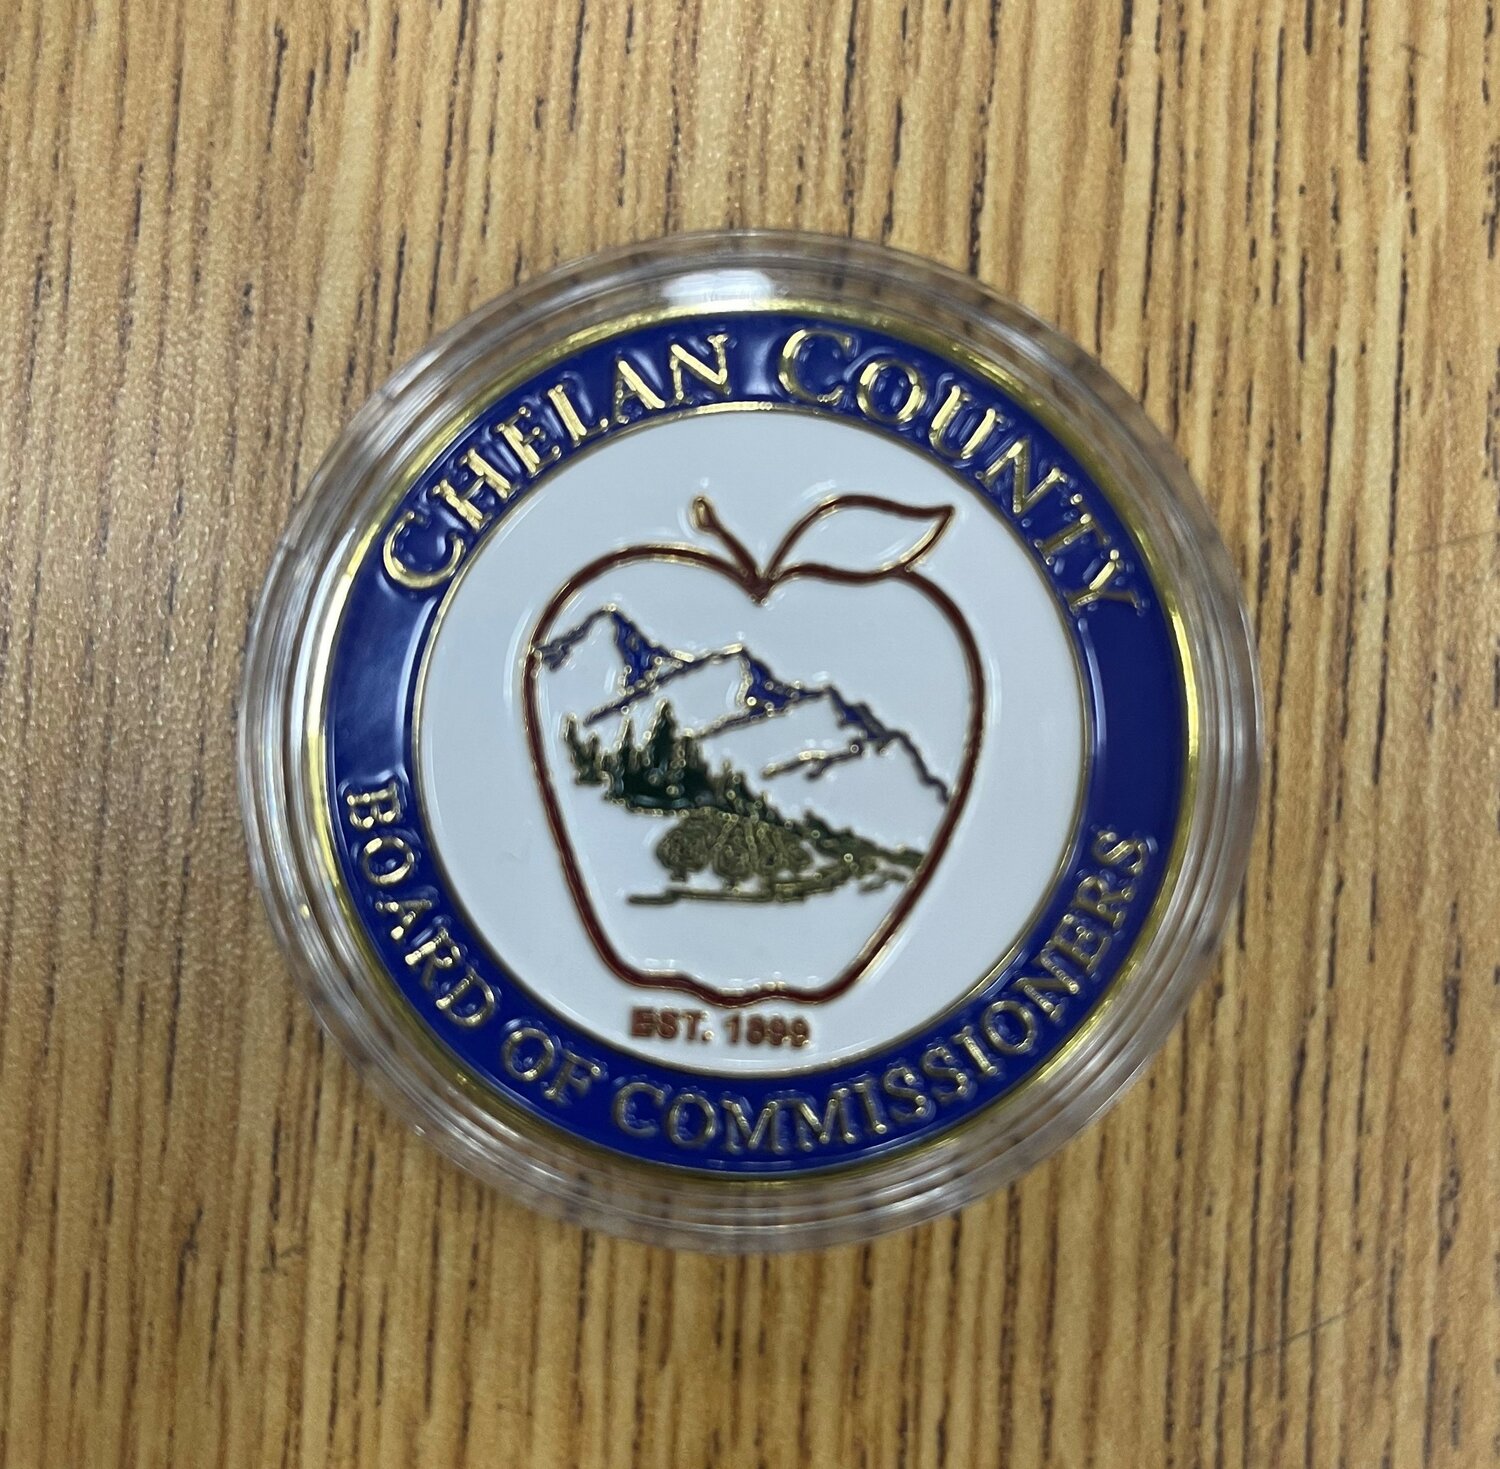 Each team member received a special challenge coin.